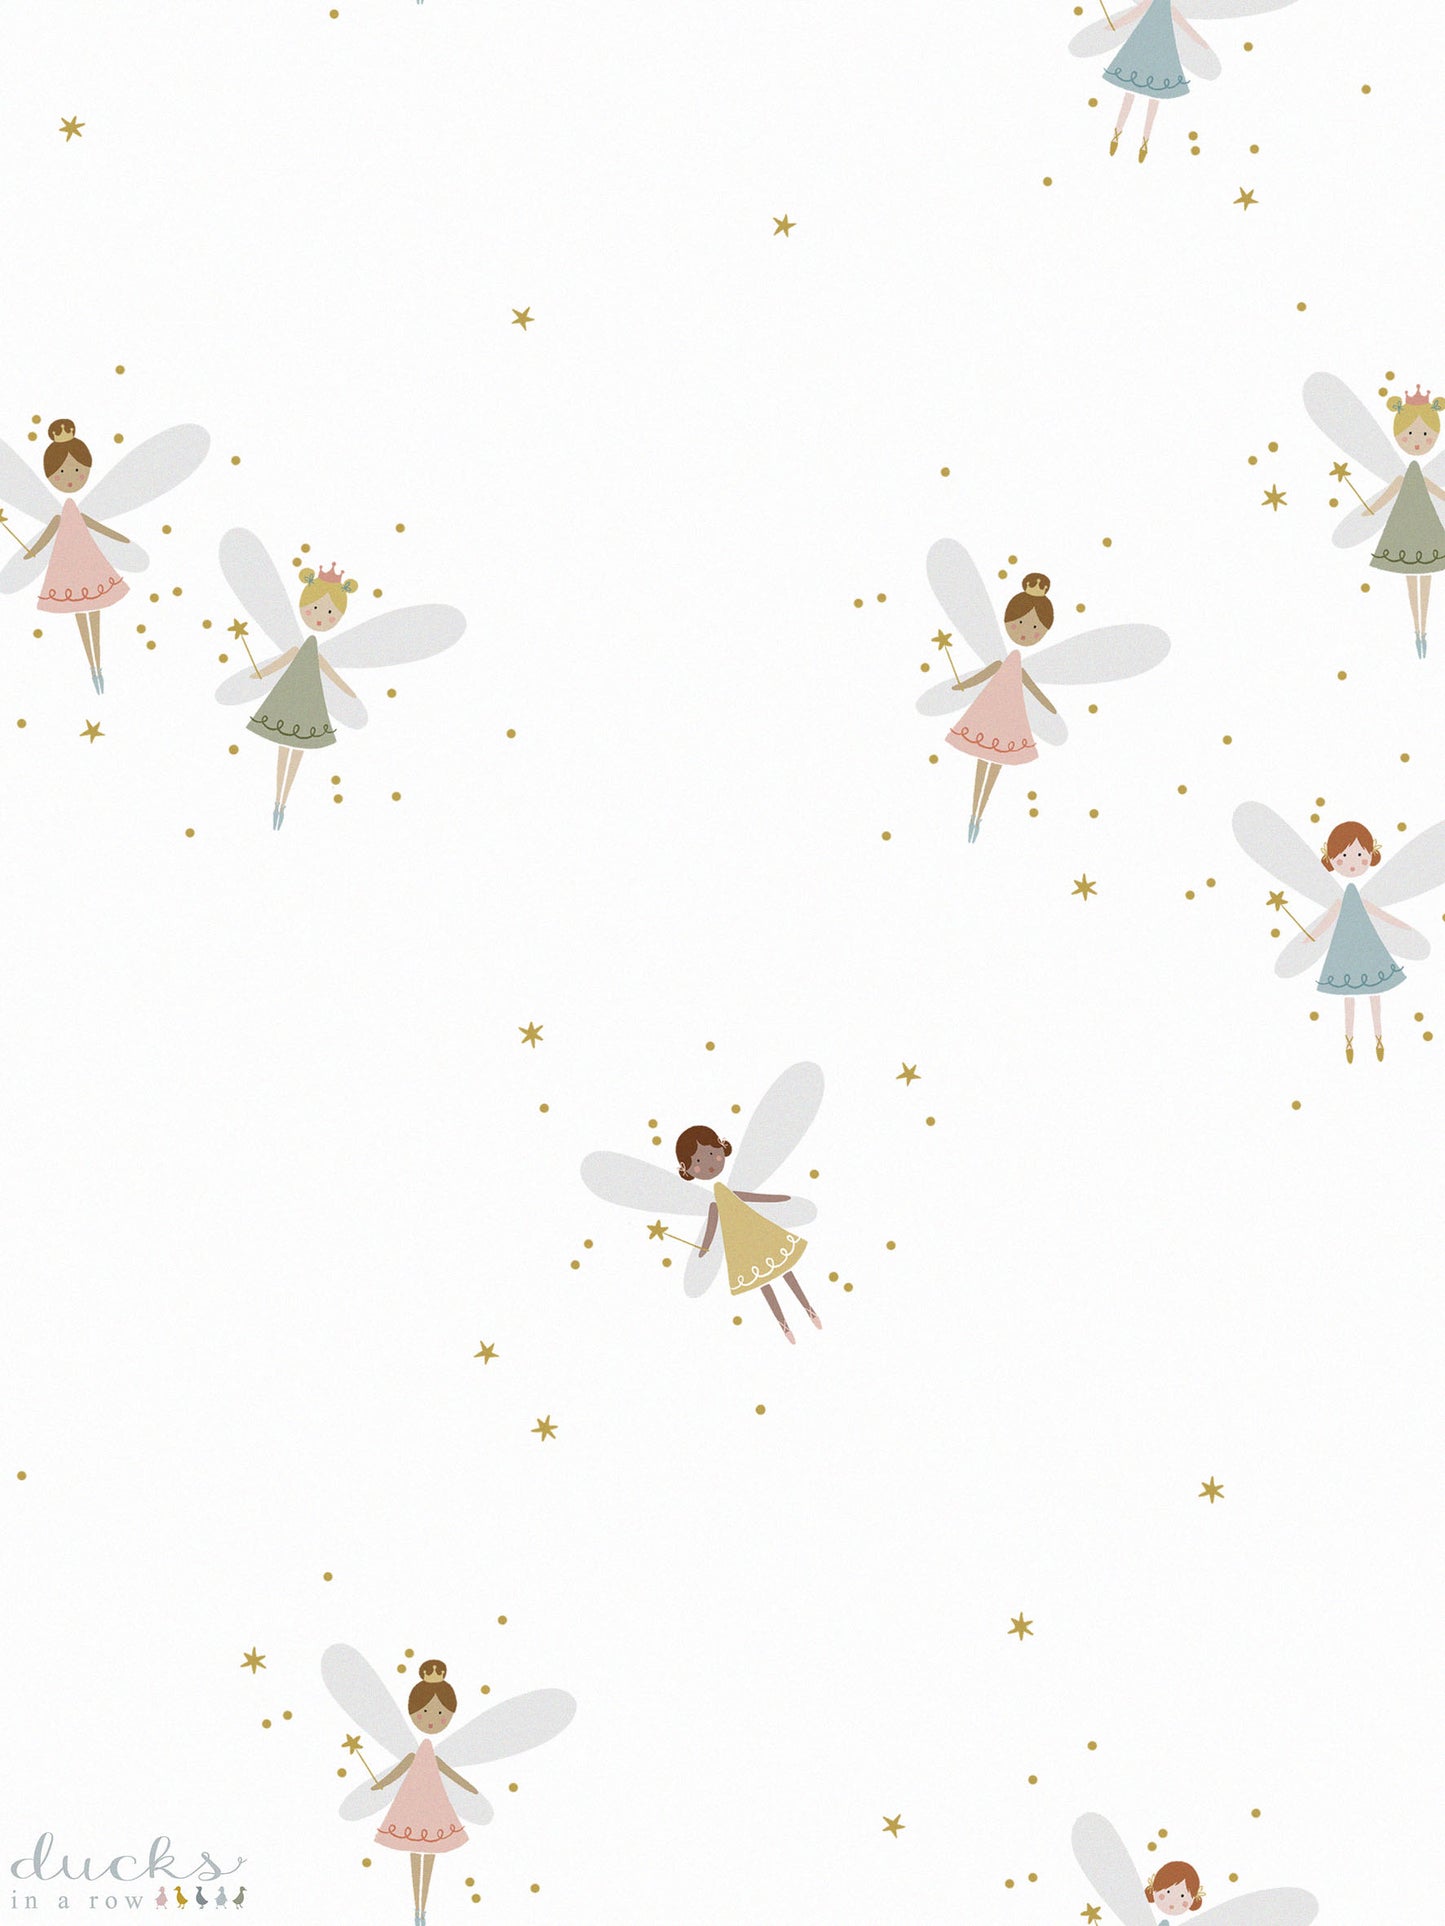 Luxury Children's wallpaper featuring illustrated fairies with pink, green, yellow and blue dresses and fairy dust